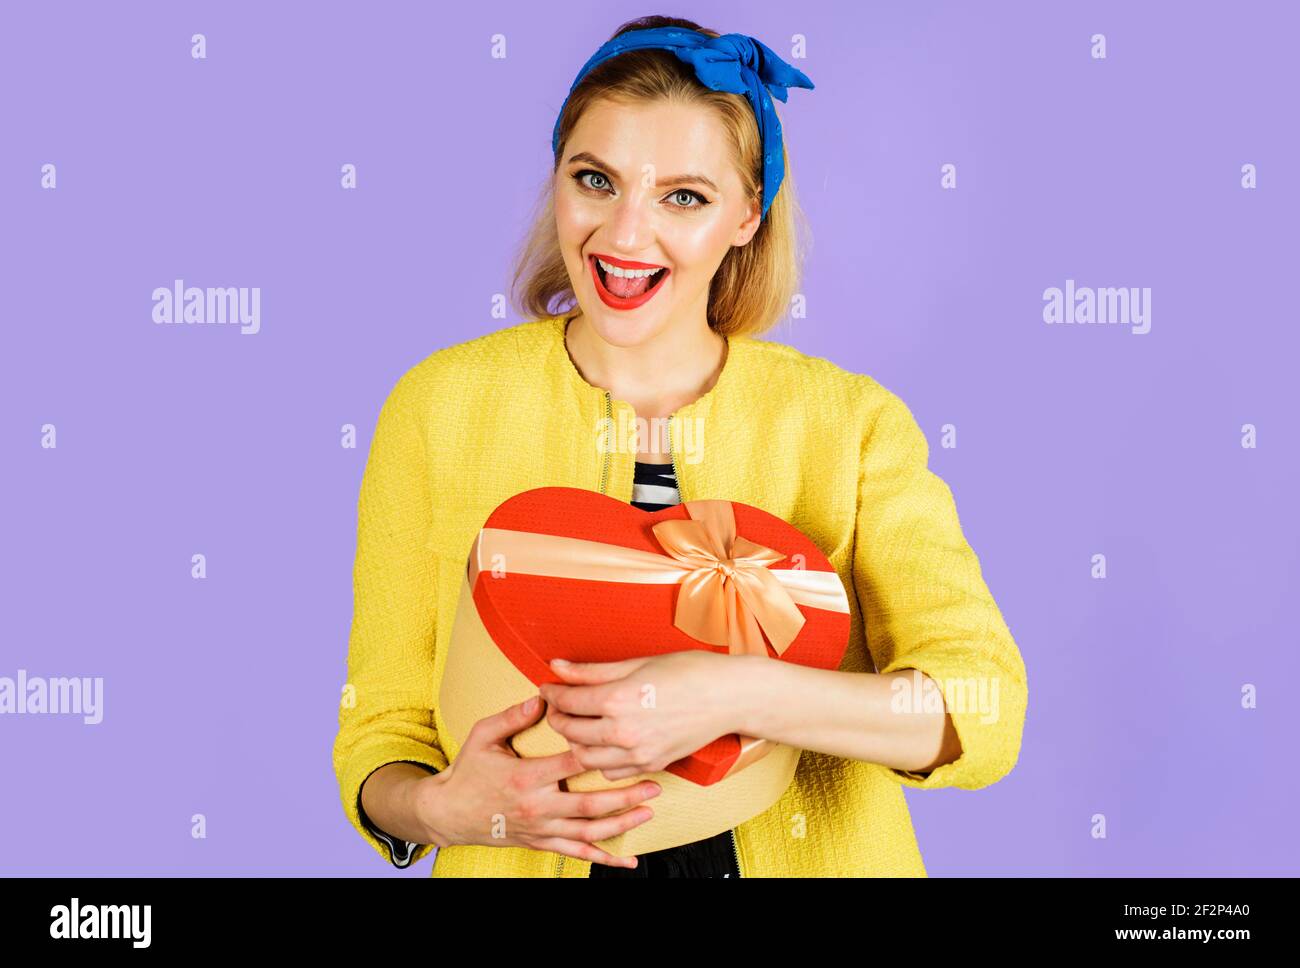 Smiling Woman with red heart gift. Present with love. Womans Day, Mothers Day, Birthday concept. Stock Photo